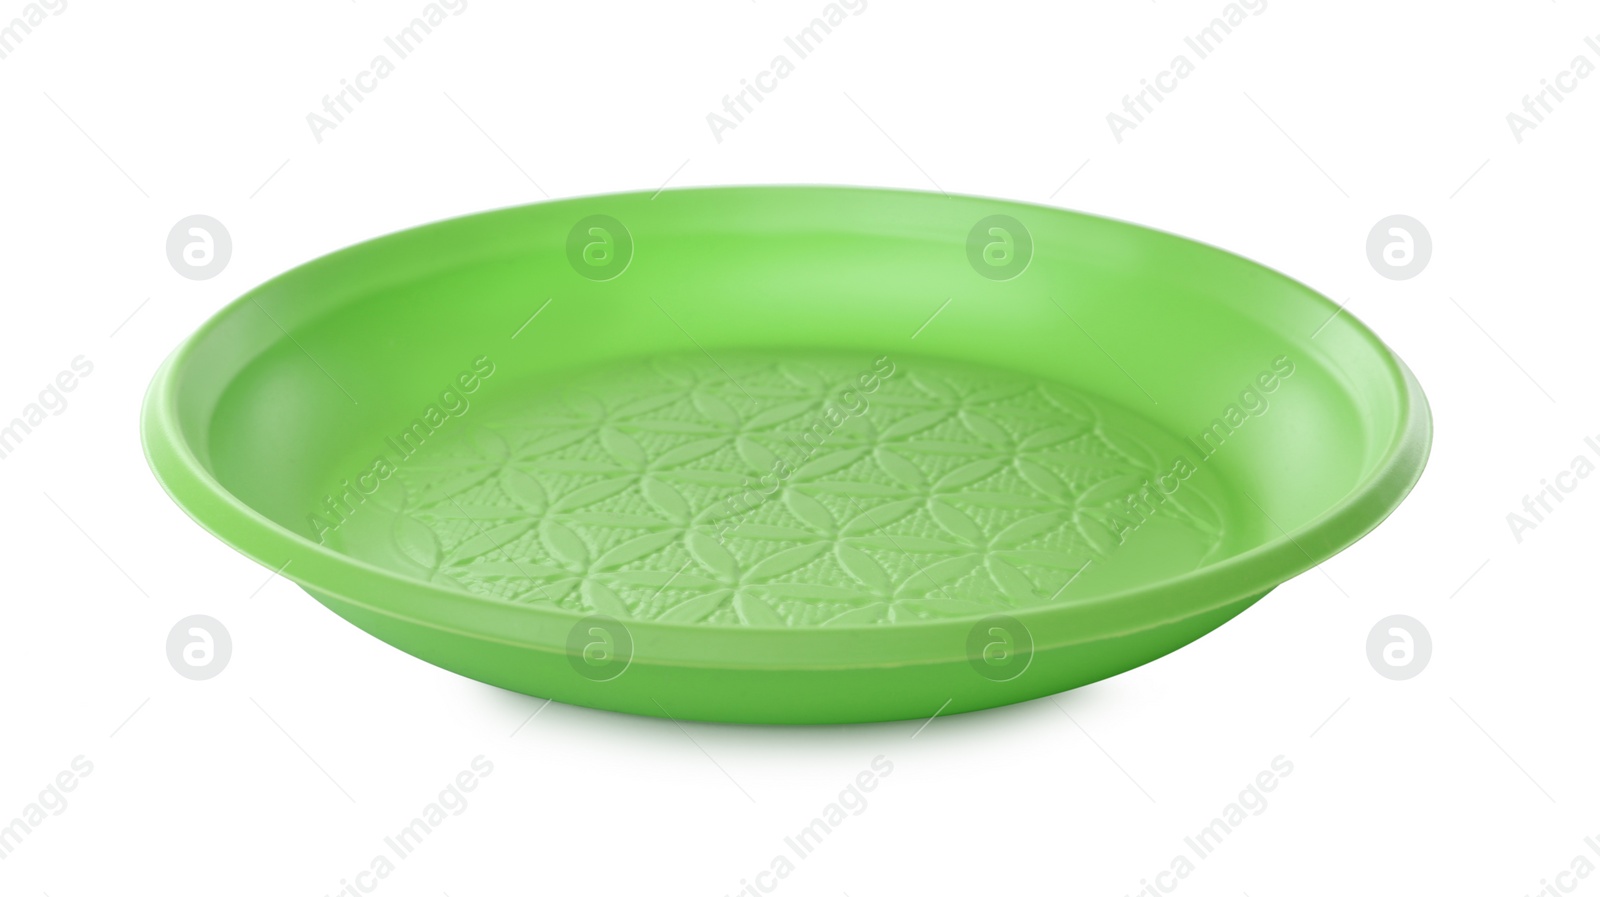 Photo of Disposable green plastic plate isolated on white